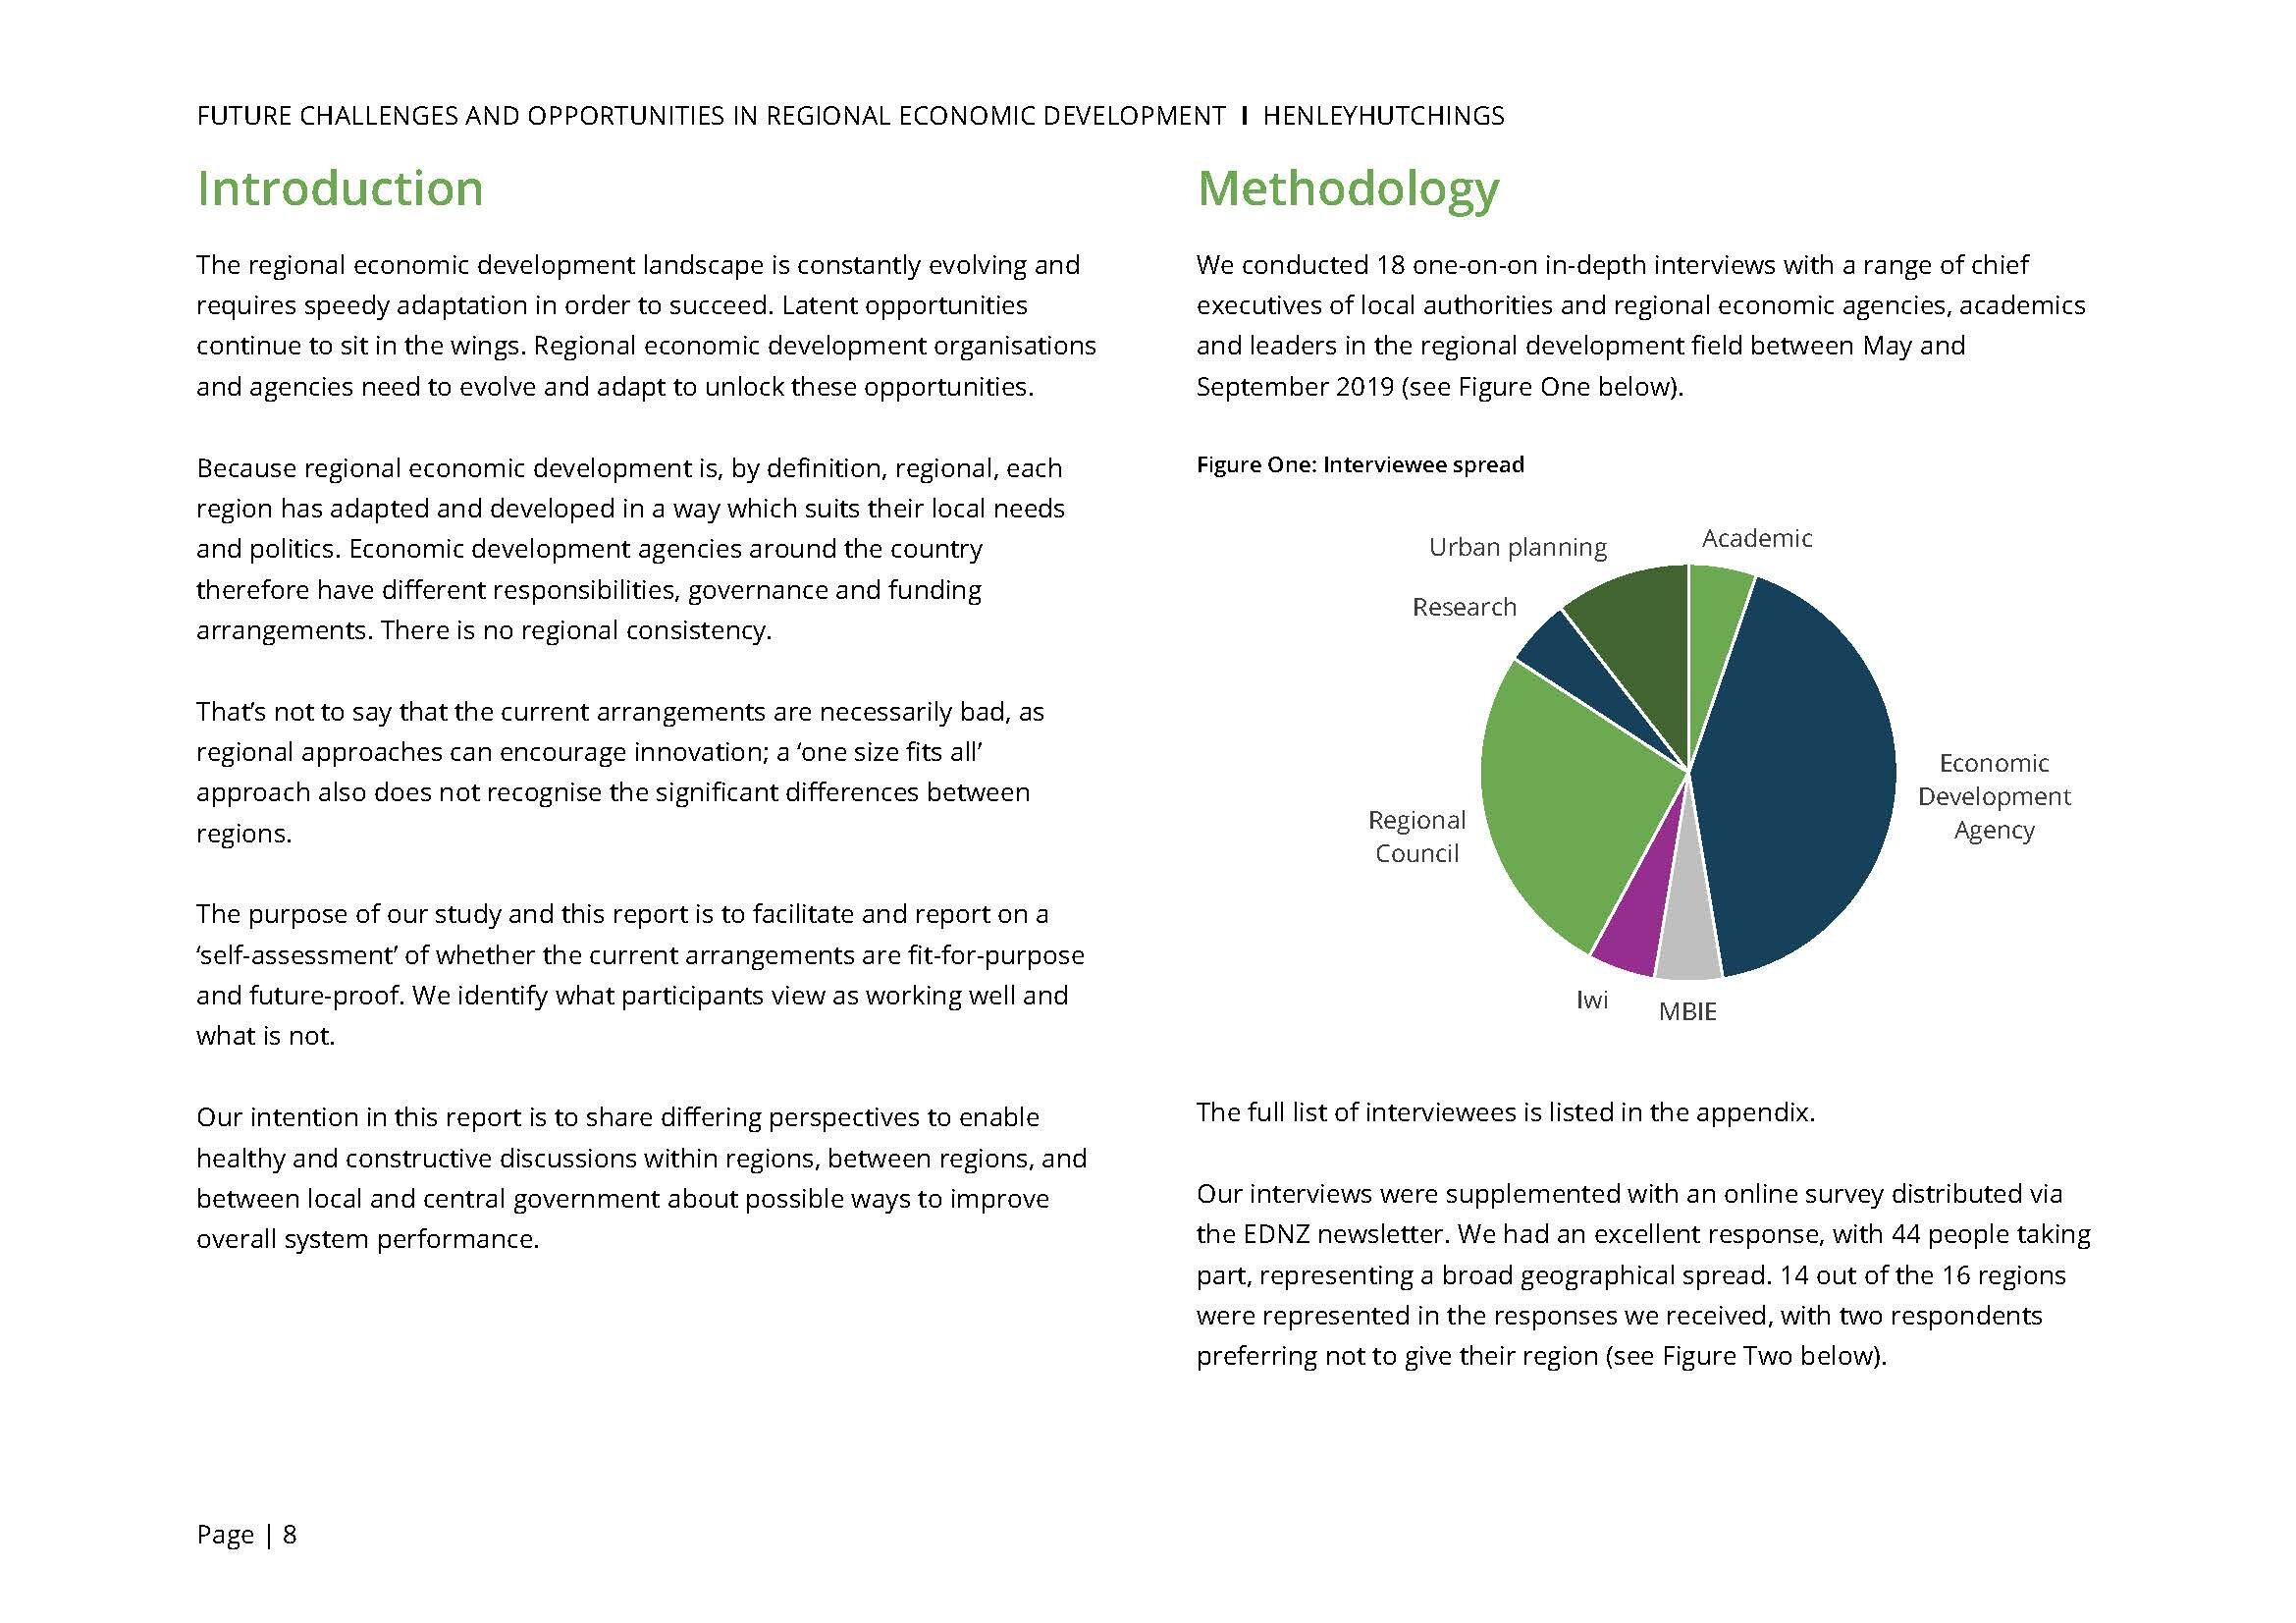 Future Challenges and Opportunities in Economic Development, HenleyHutchings TEST_Page_08.jpg